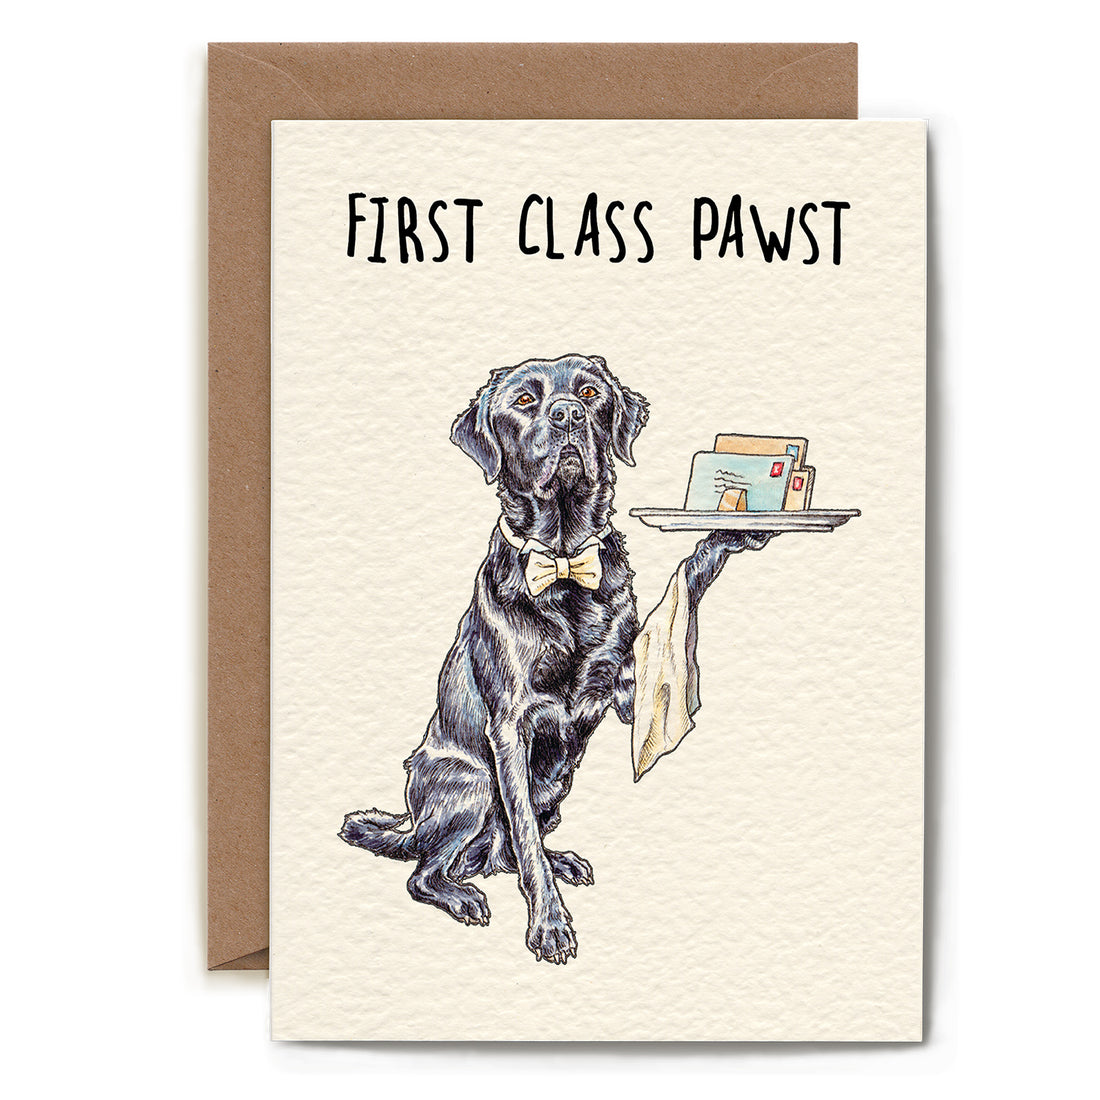 A First Class Pawst Card from Hester &amp; Cook with a drawing of a dog holding a tray.